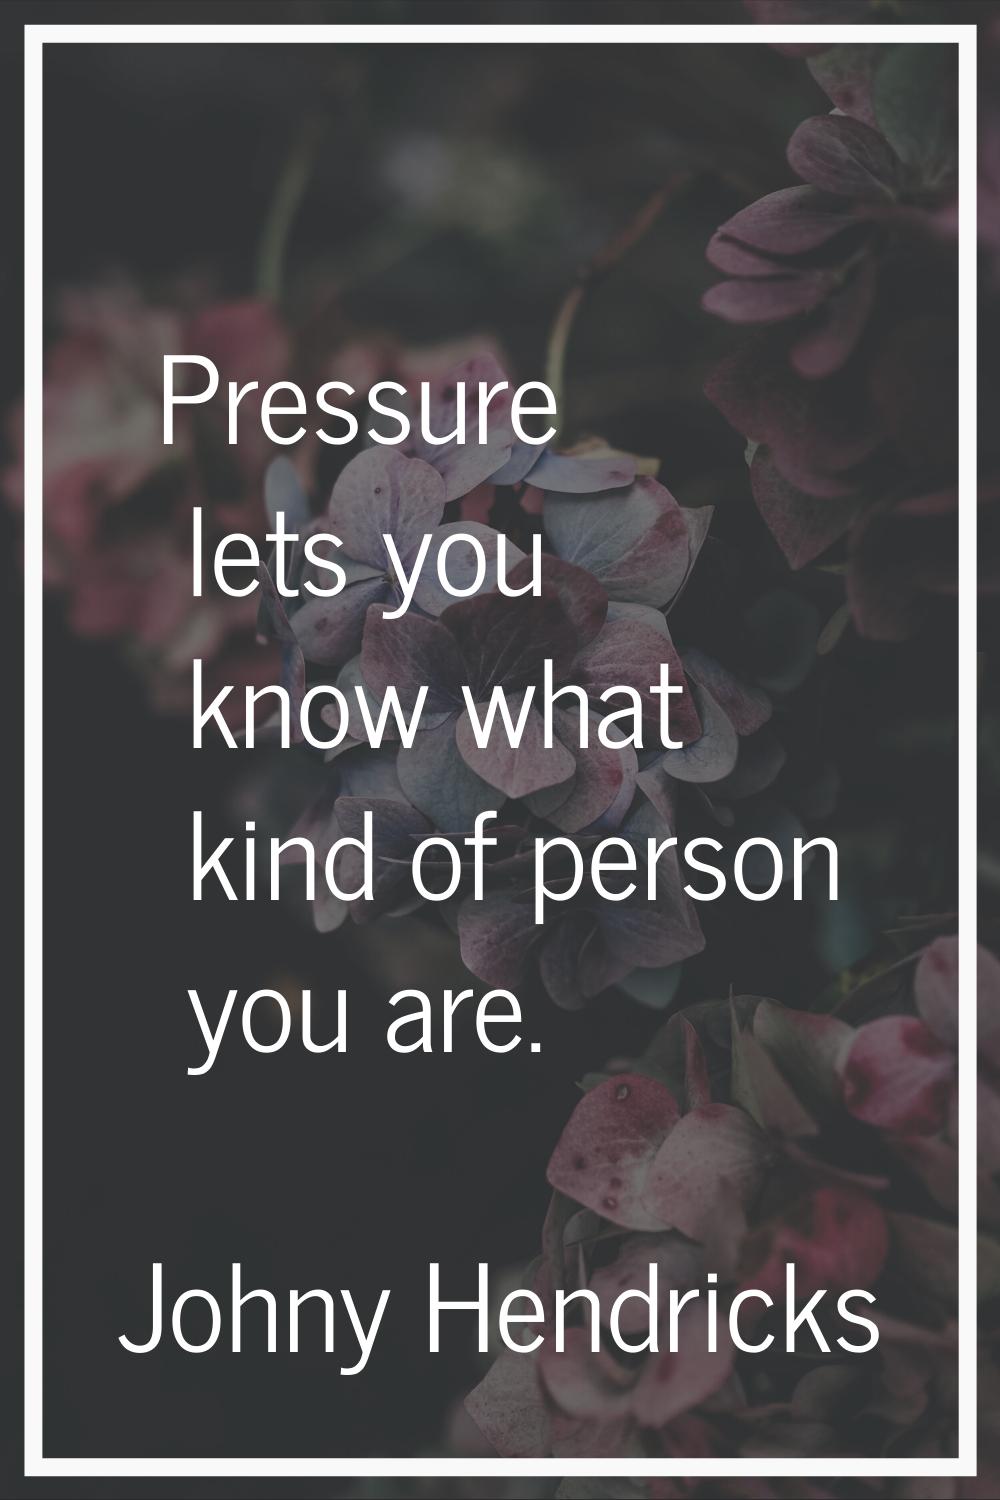 Pressure lets you know what kind of person you are.